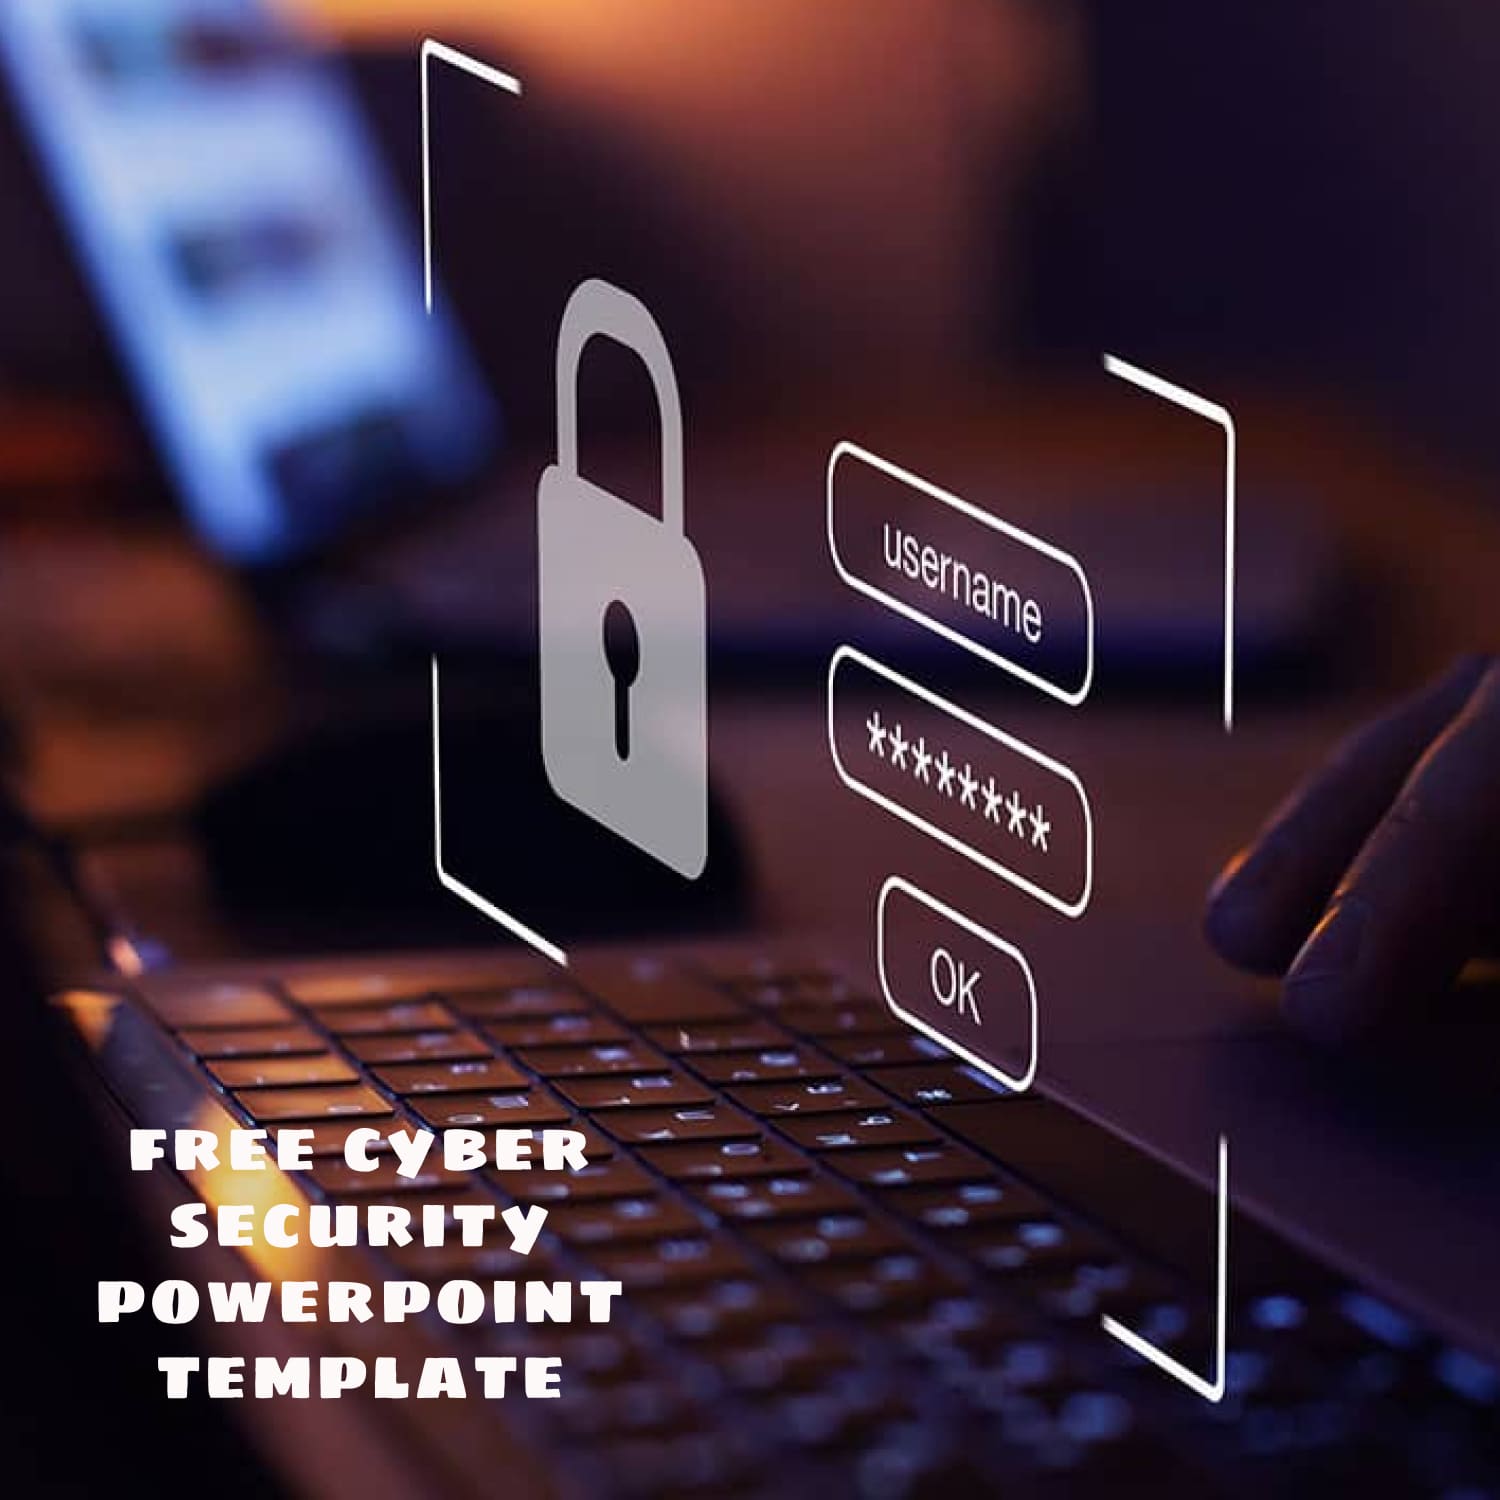 ppt presentation on cyber security free download